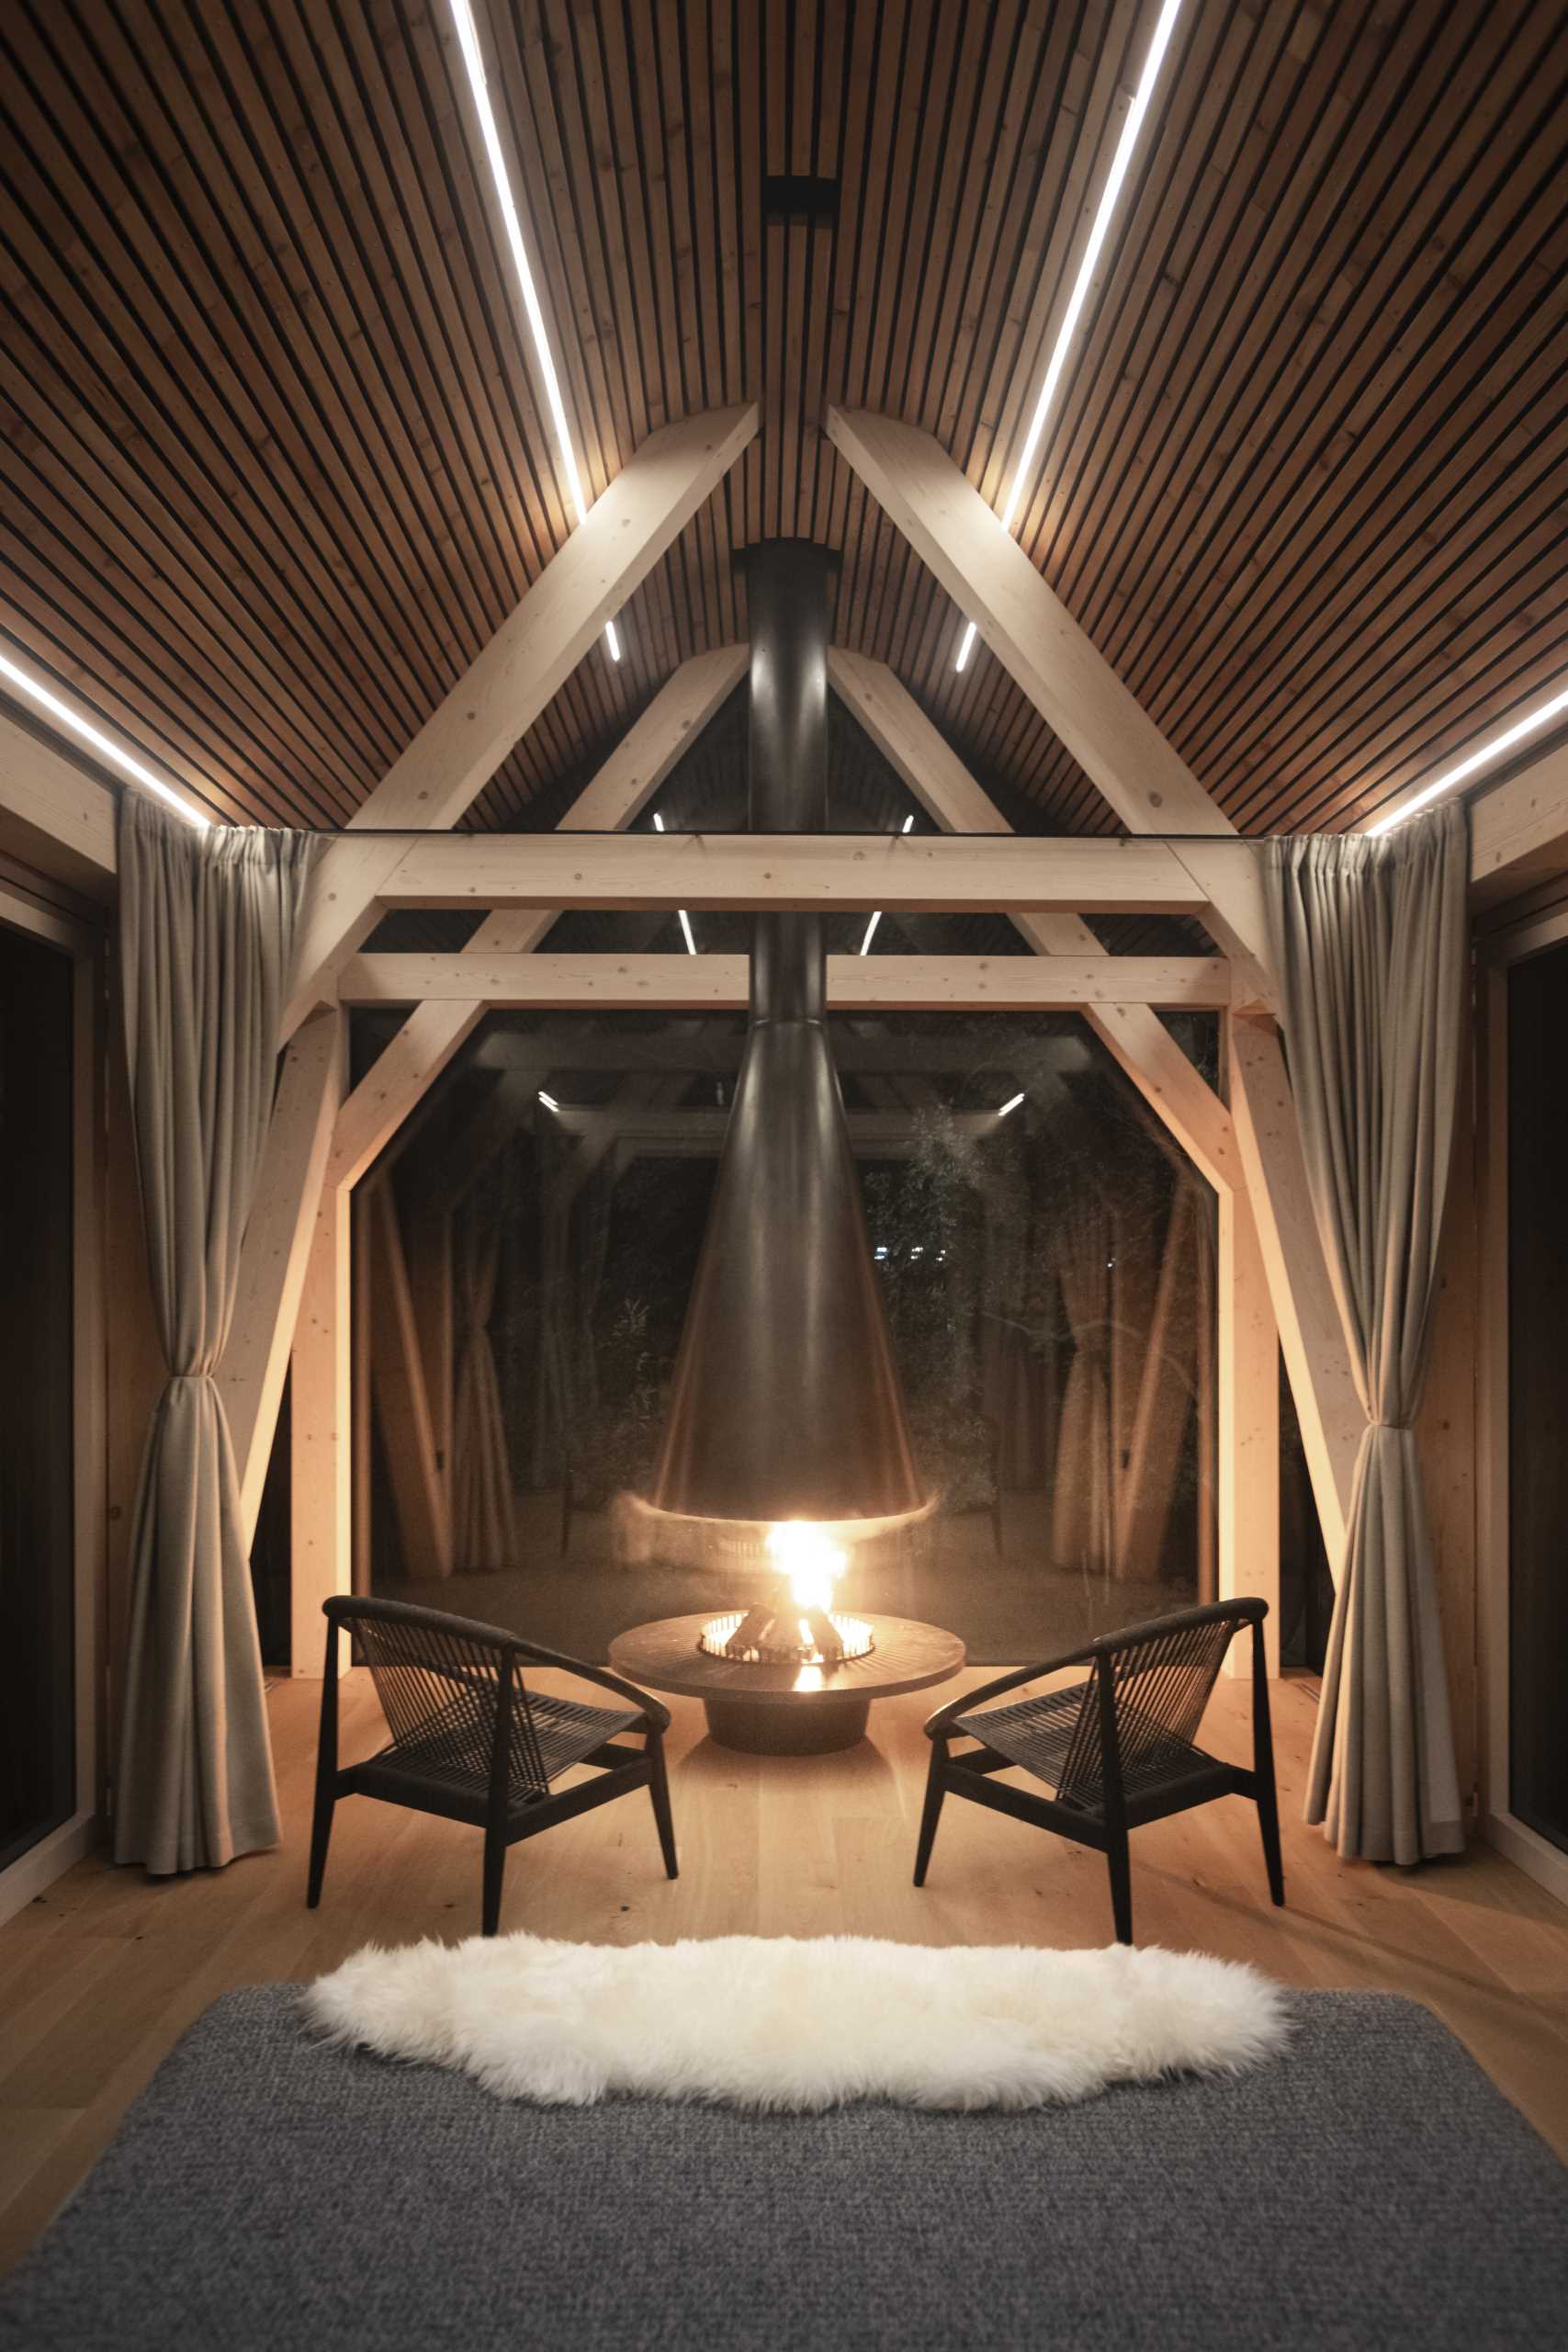 A modern elevated cabin with gl، walls, a bed, a bar, and a fireplace.